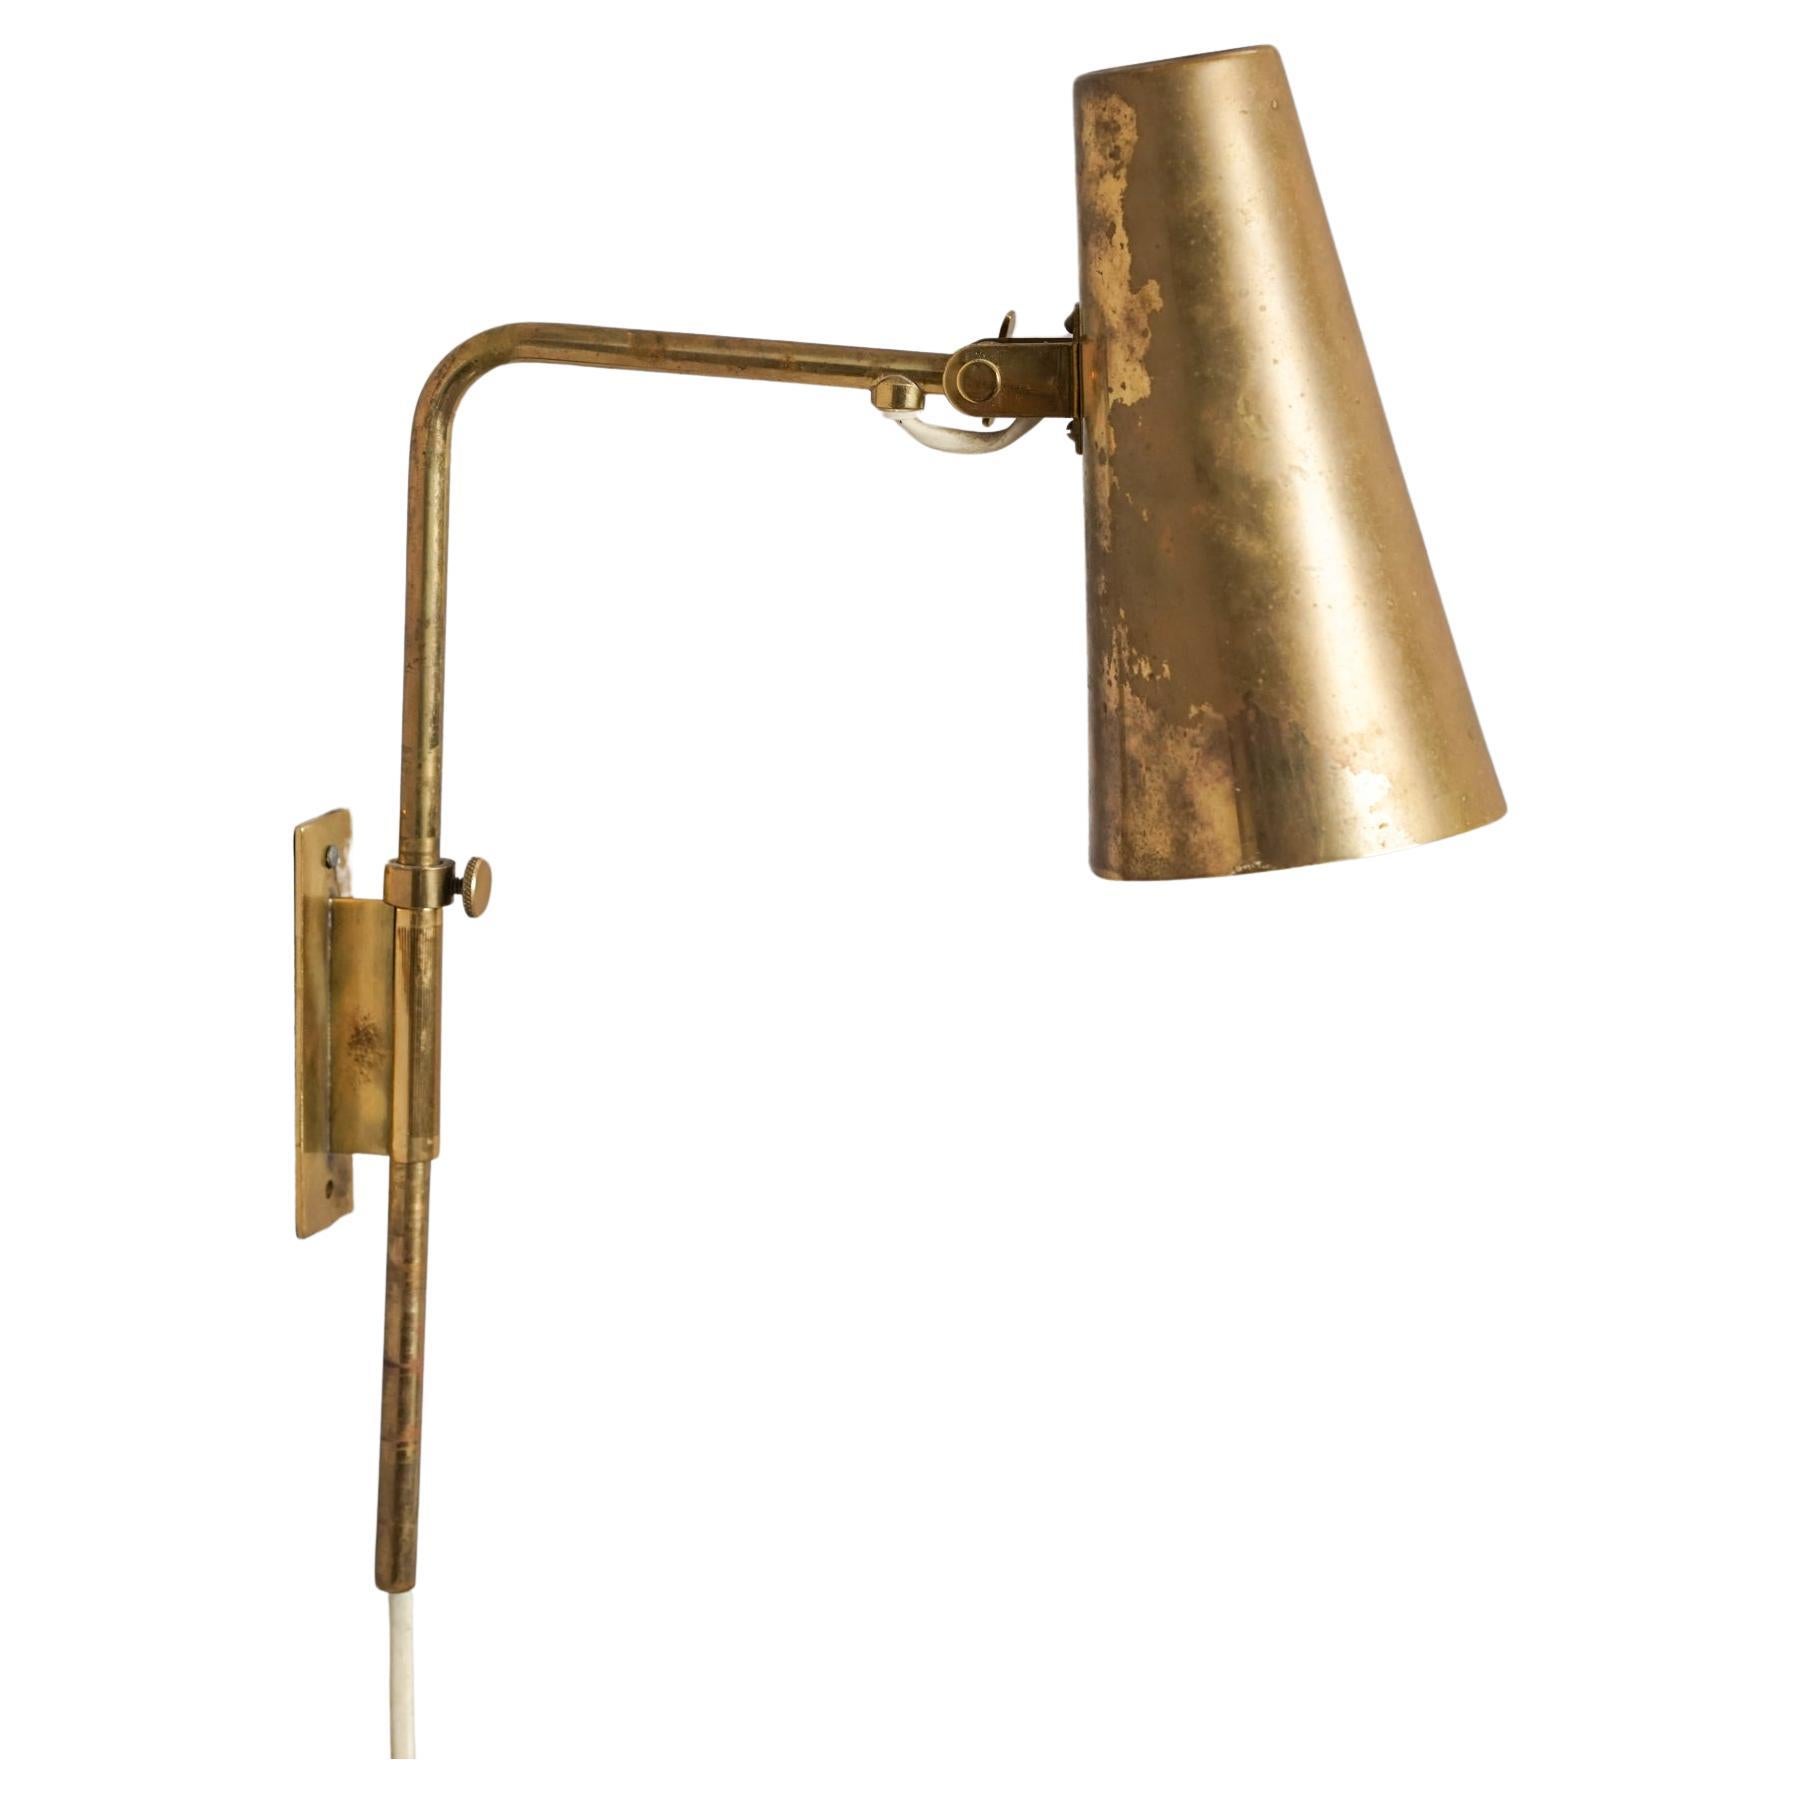 Model 9459 wall light by Paavo Tynell from Idman Oy from the 1940/1950s. Brass. Good vintage condition, minor patina and wear consistent with age and use. Iconic Paavo Tynell design.